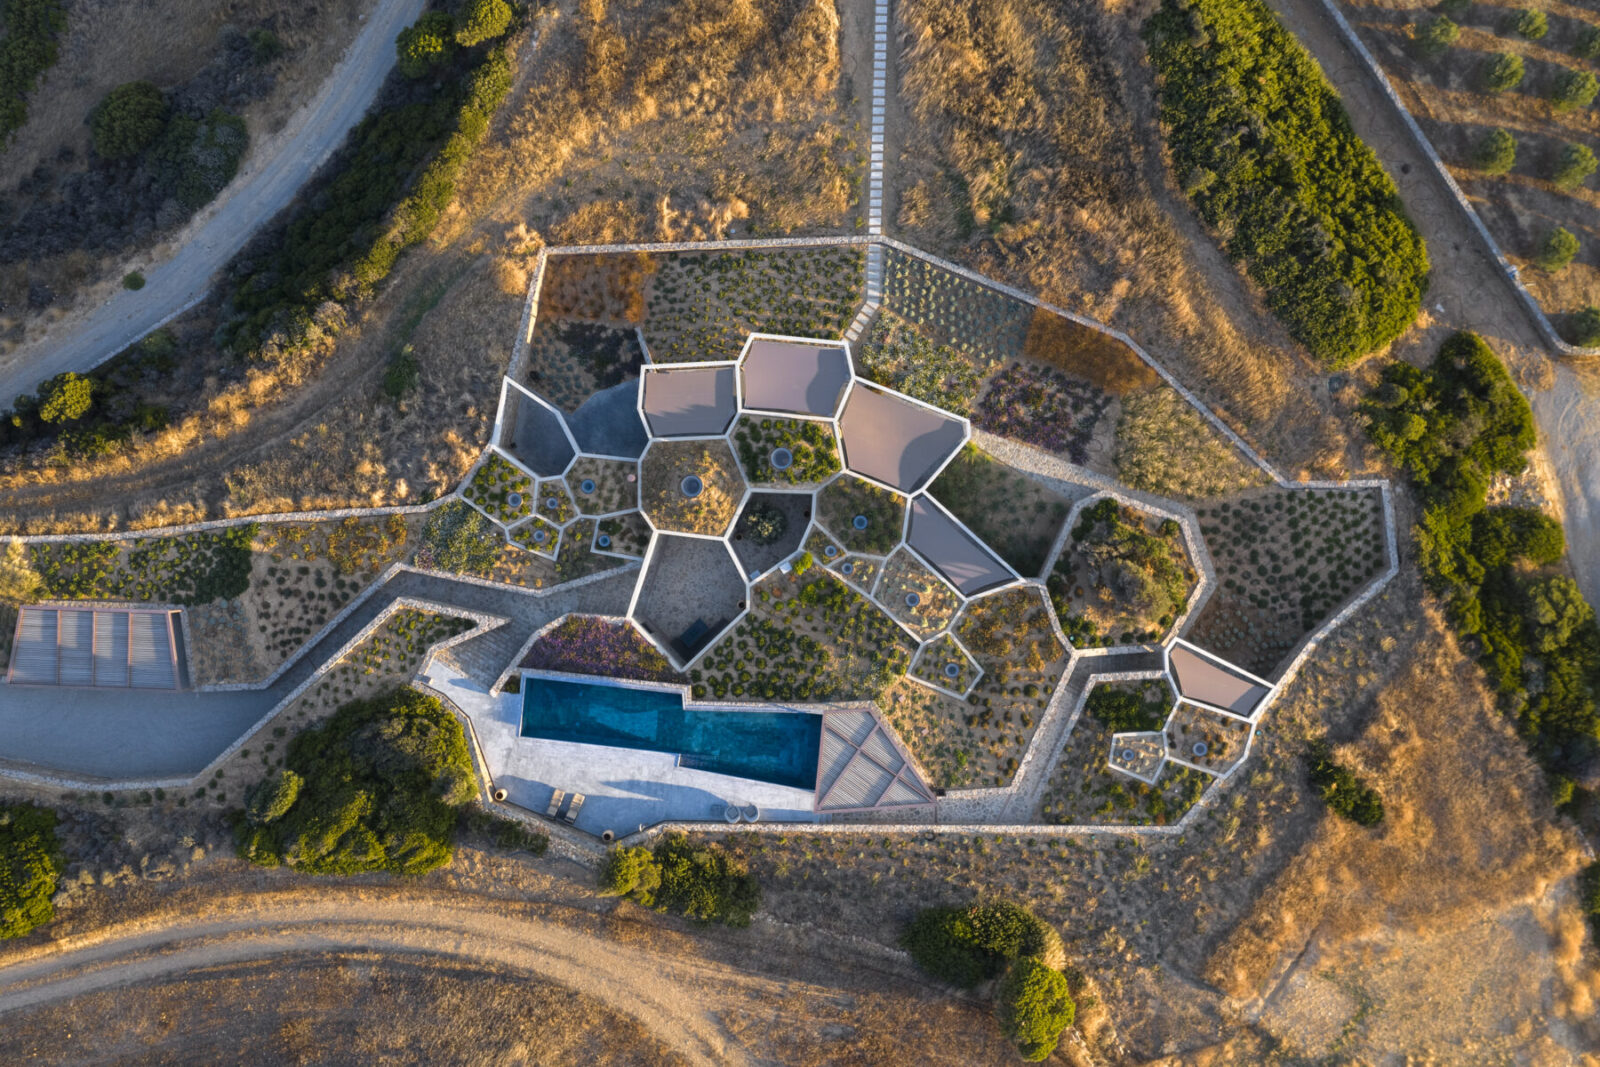 Archisearch 2022 EIA Architecture Award _ The Hourglass Corral House in ‘Voronoi’s Corrals’ project, Milos island, Cyclades | DECA Architecture